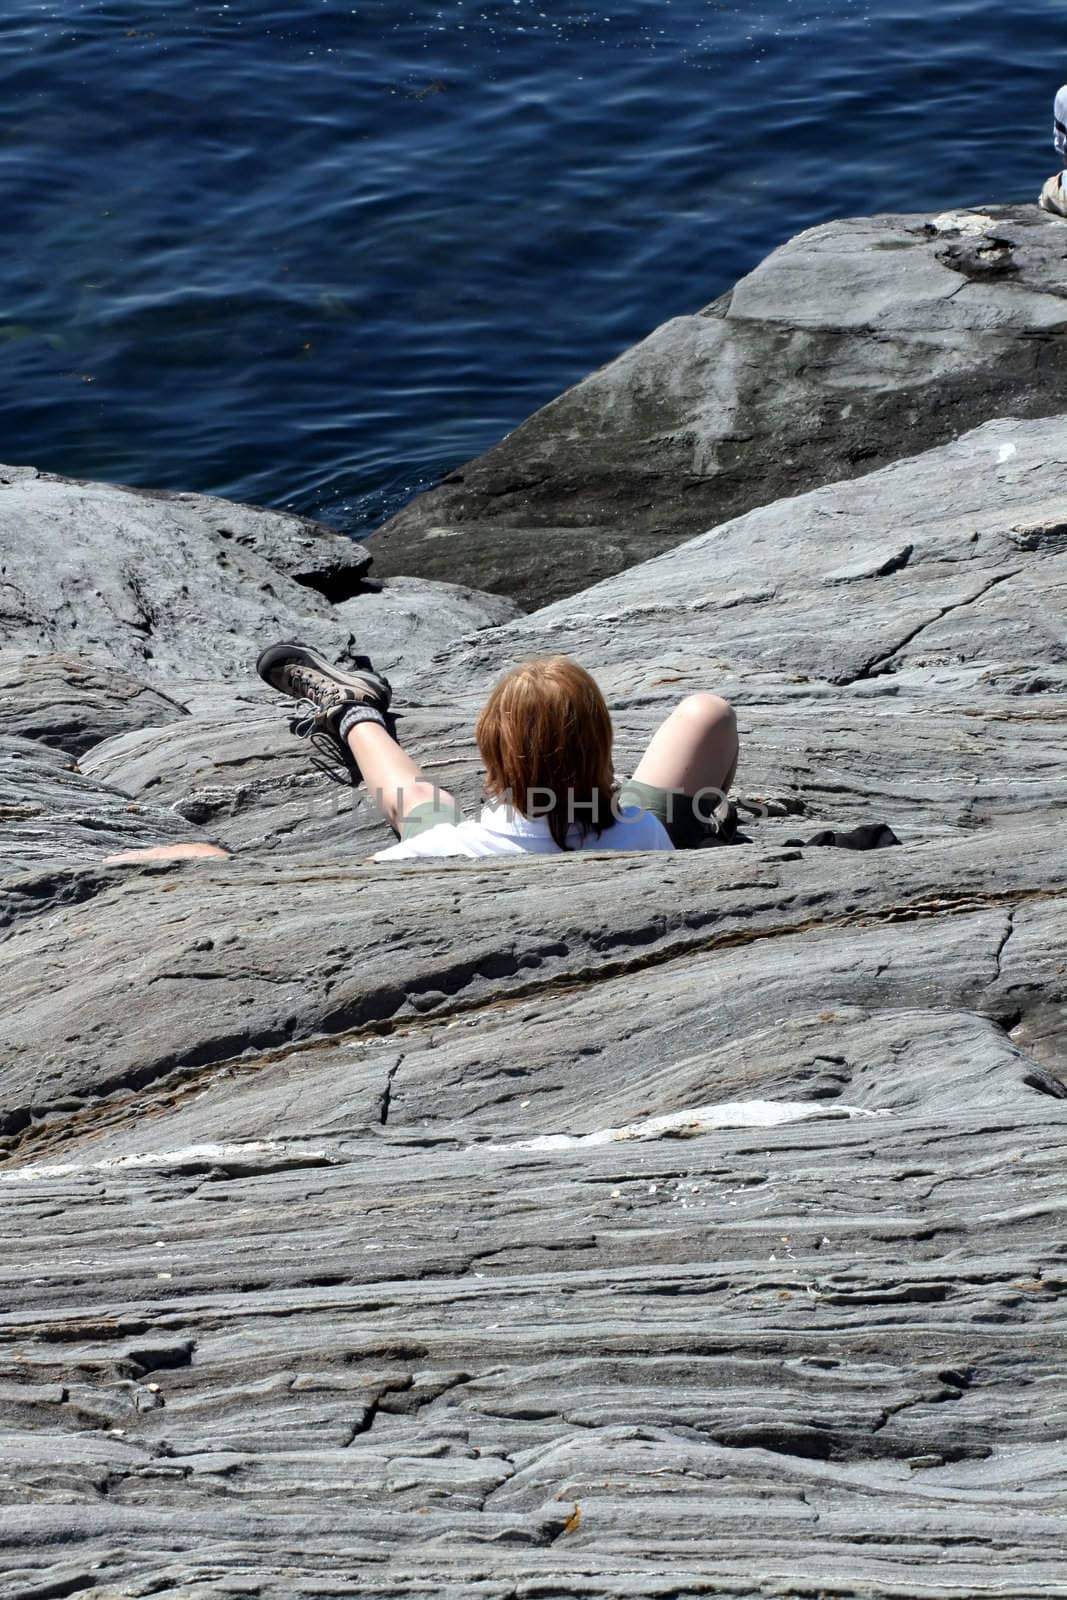 a young man, fallen on the granite cliffs next to the ocean
